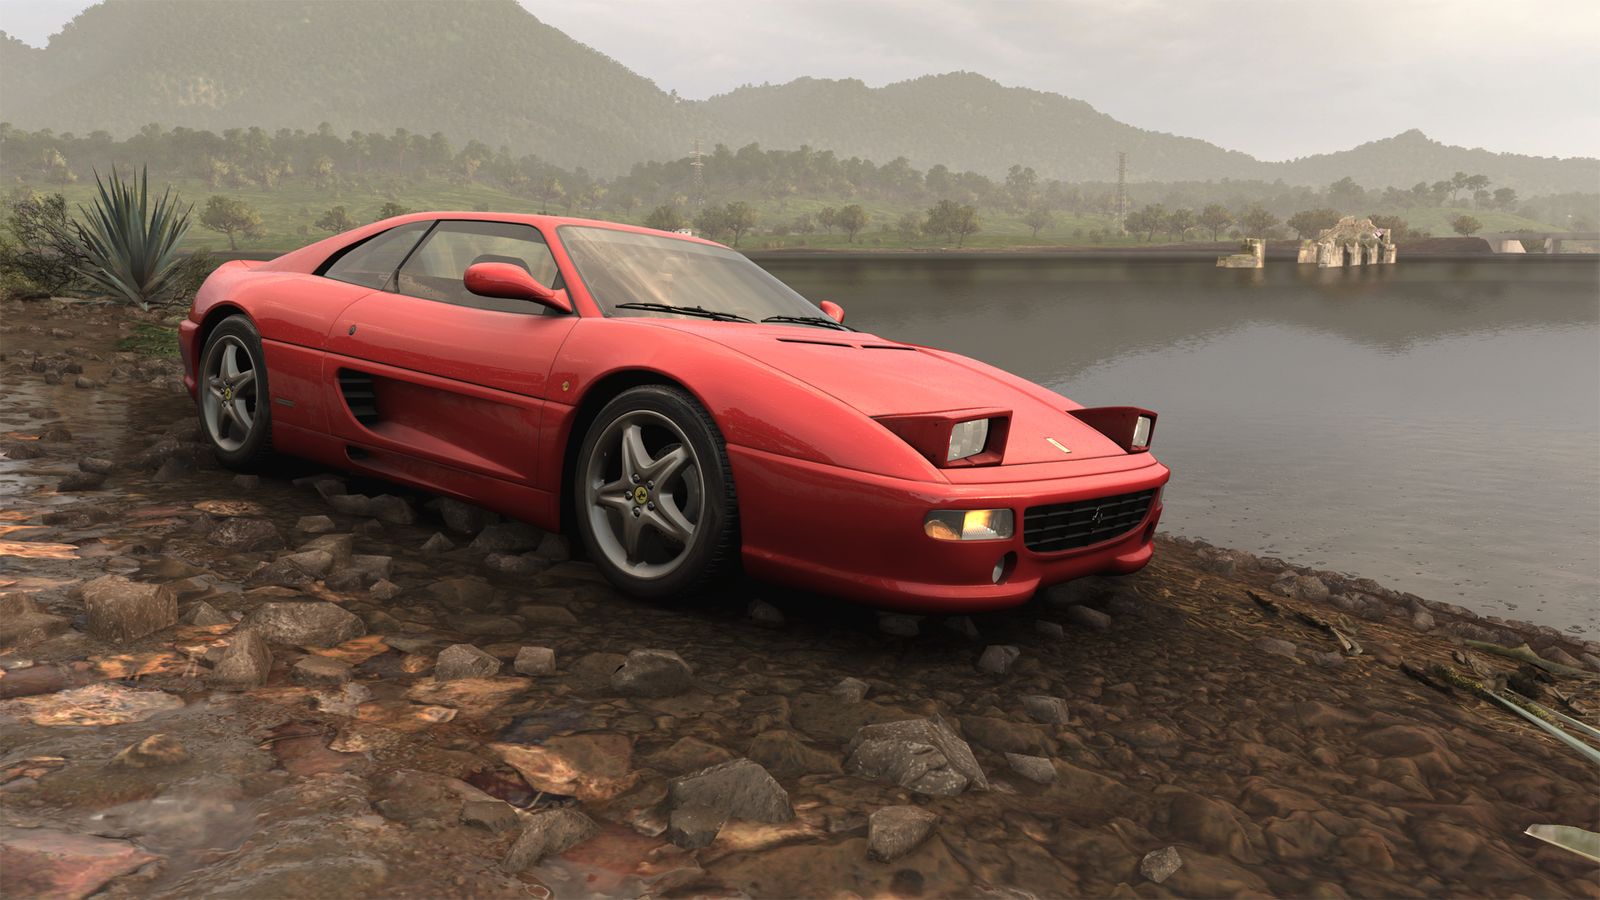 Forza Horizon 5 #FastFromThePast Photo Challenge at the Temple of Quechula 